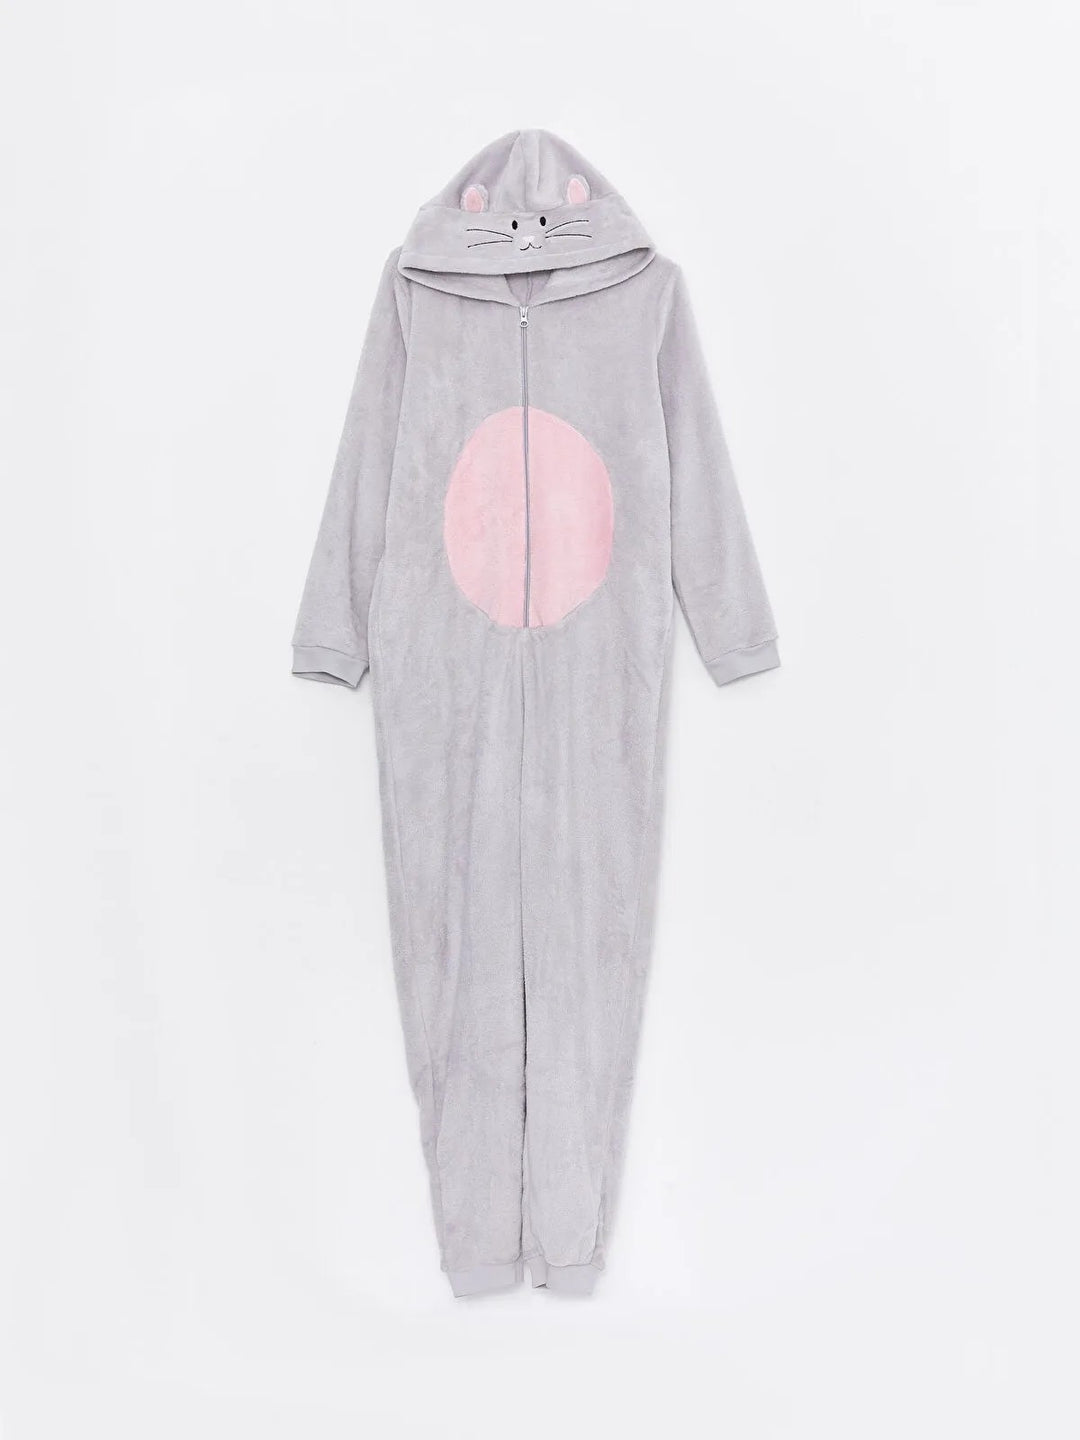 Women Plush Sleeping Bag With Hooded Embroidery Long Sleeve